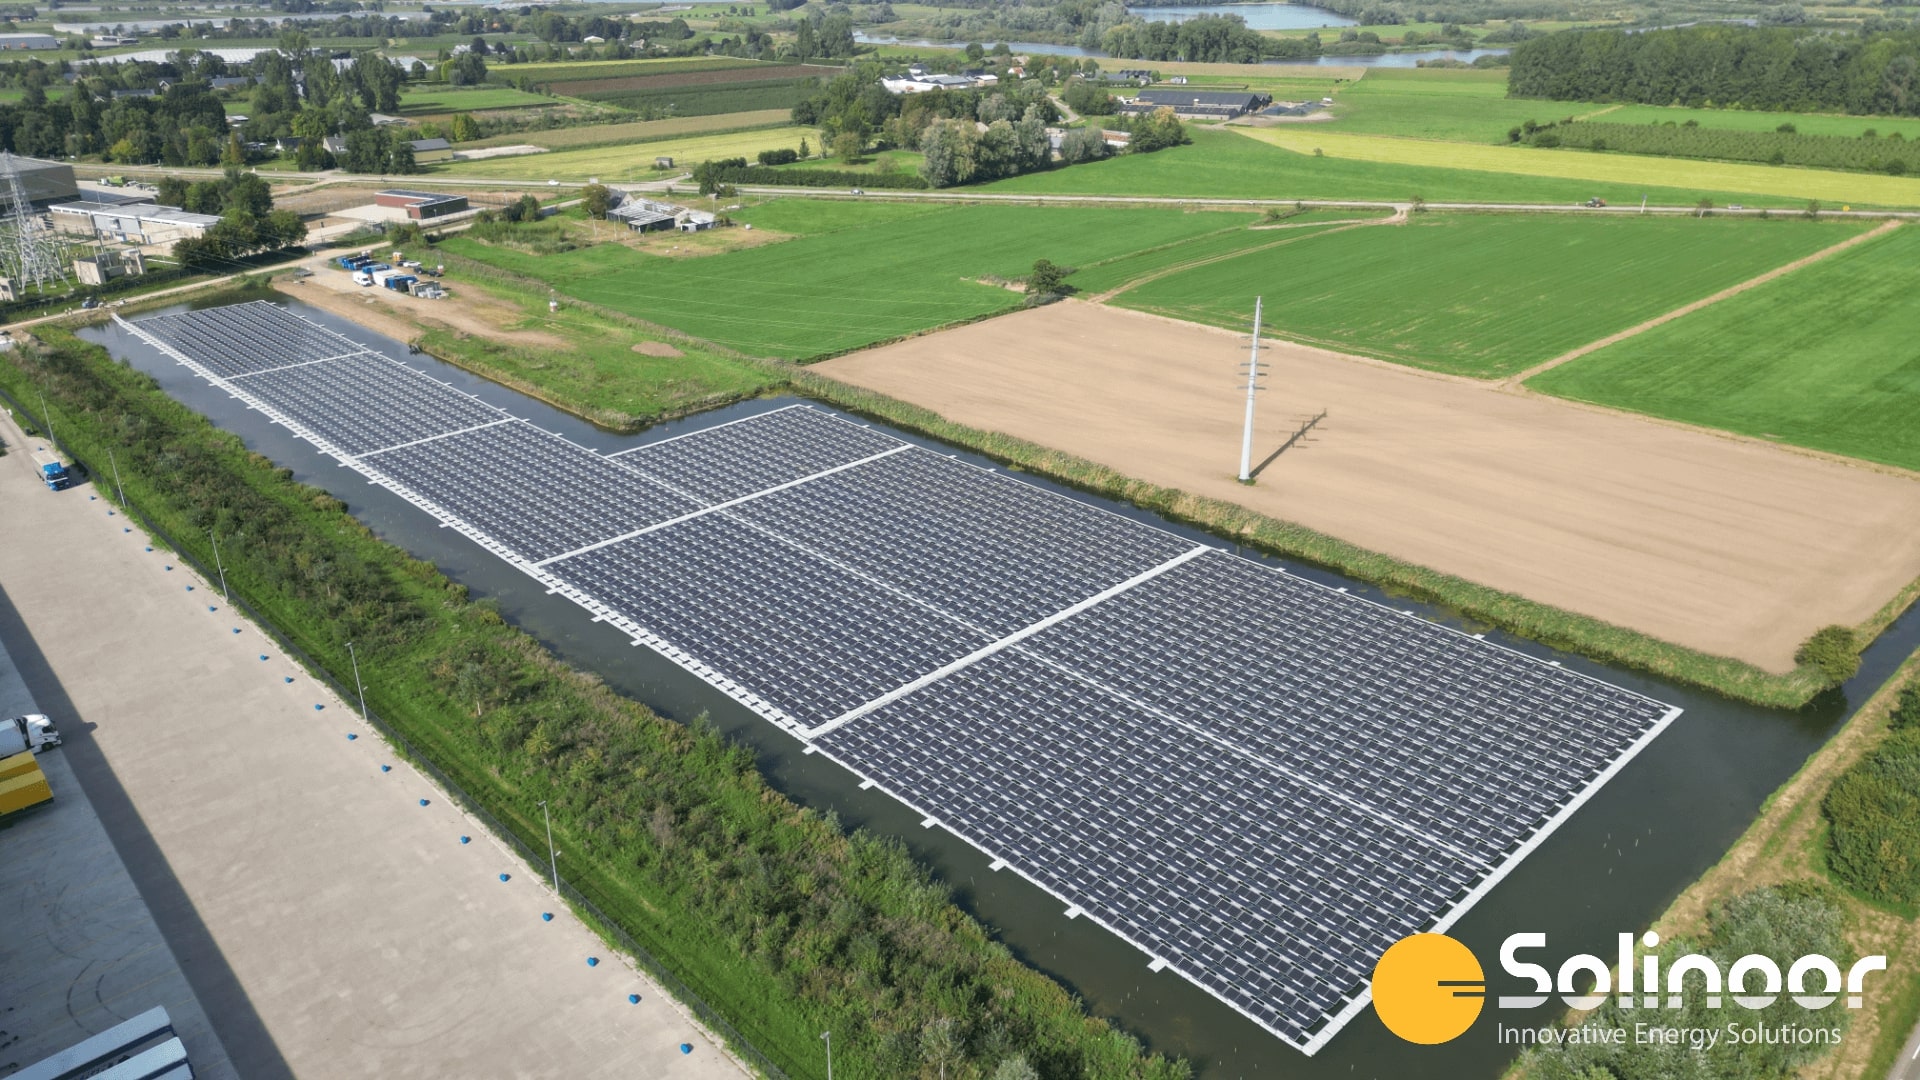 Floating solar park Zaltbommel completed with an areal view on nature